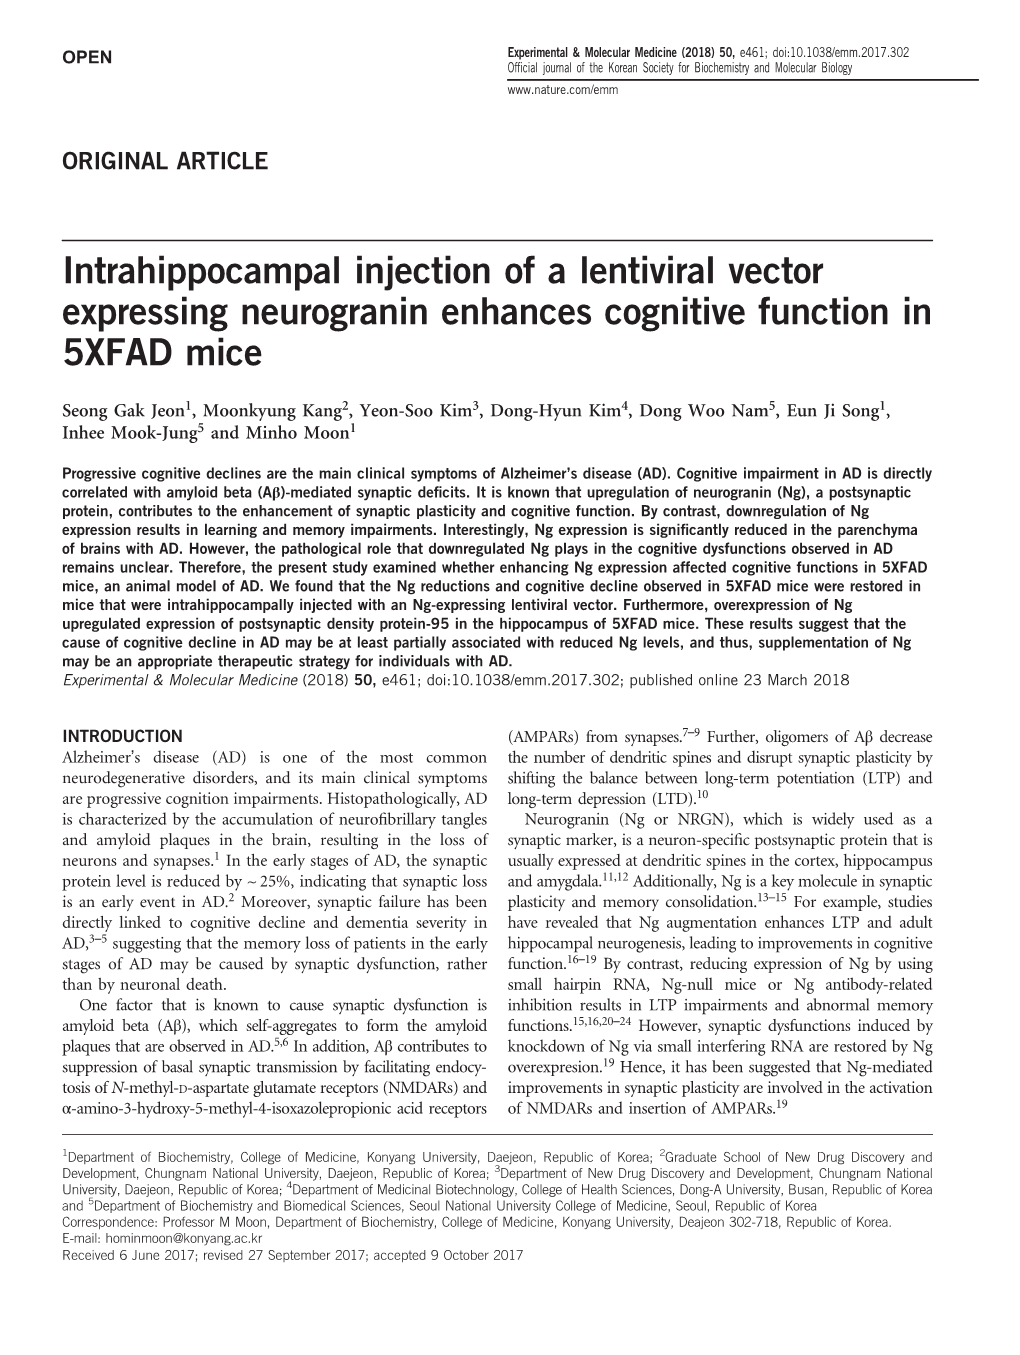 Intrahippocampal Injection of a Lentiviral Vector Expressing Neurogranin Enhances Cognitive Function in 5XFAD Mice